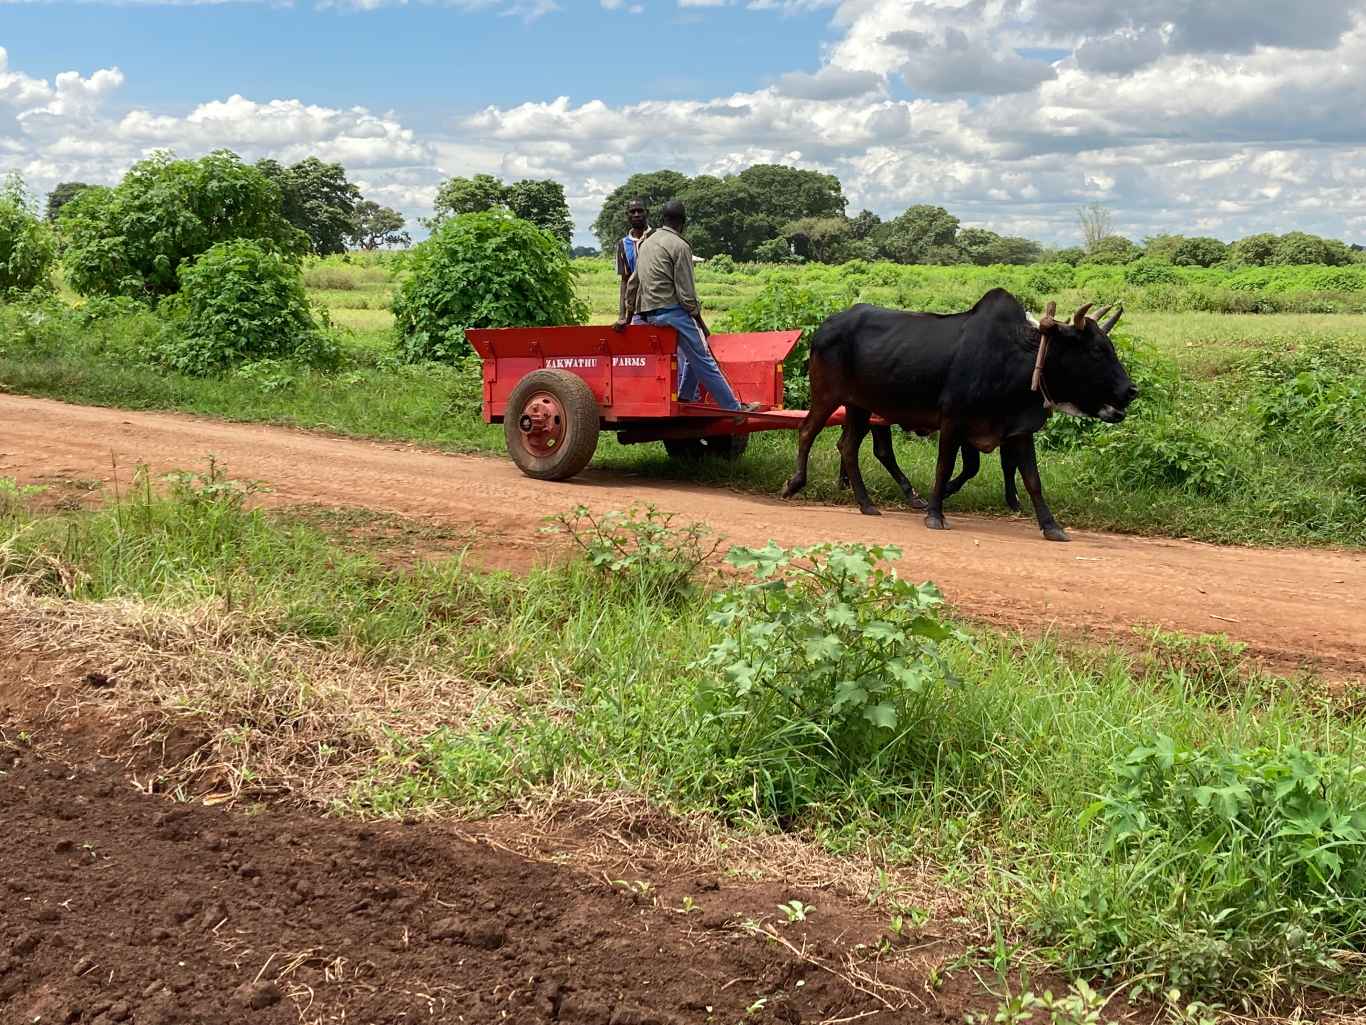 An ox pulling a red, wooden cart along a rural dirt road in Malawi with two riders.